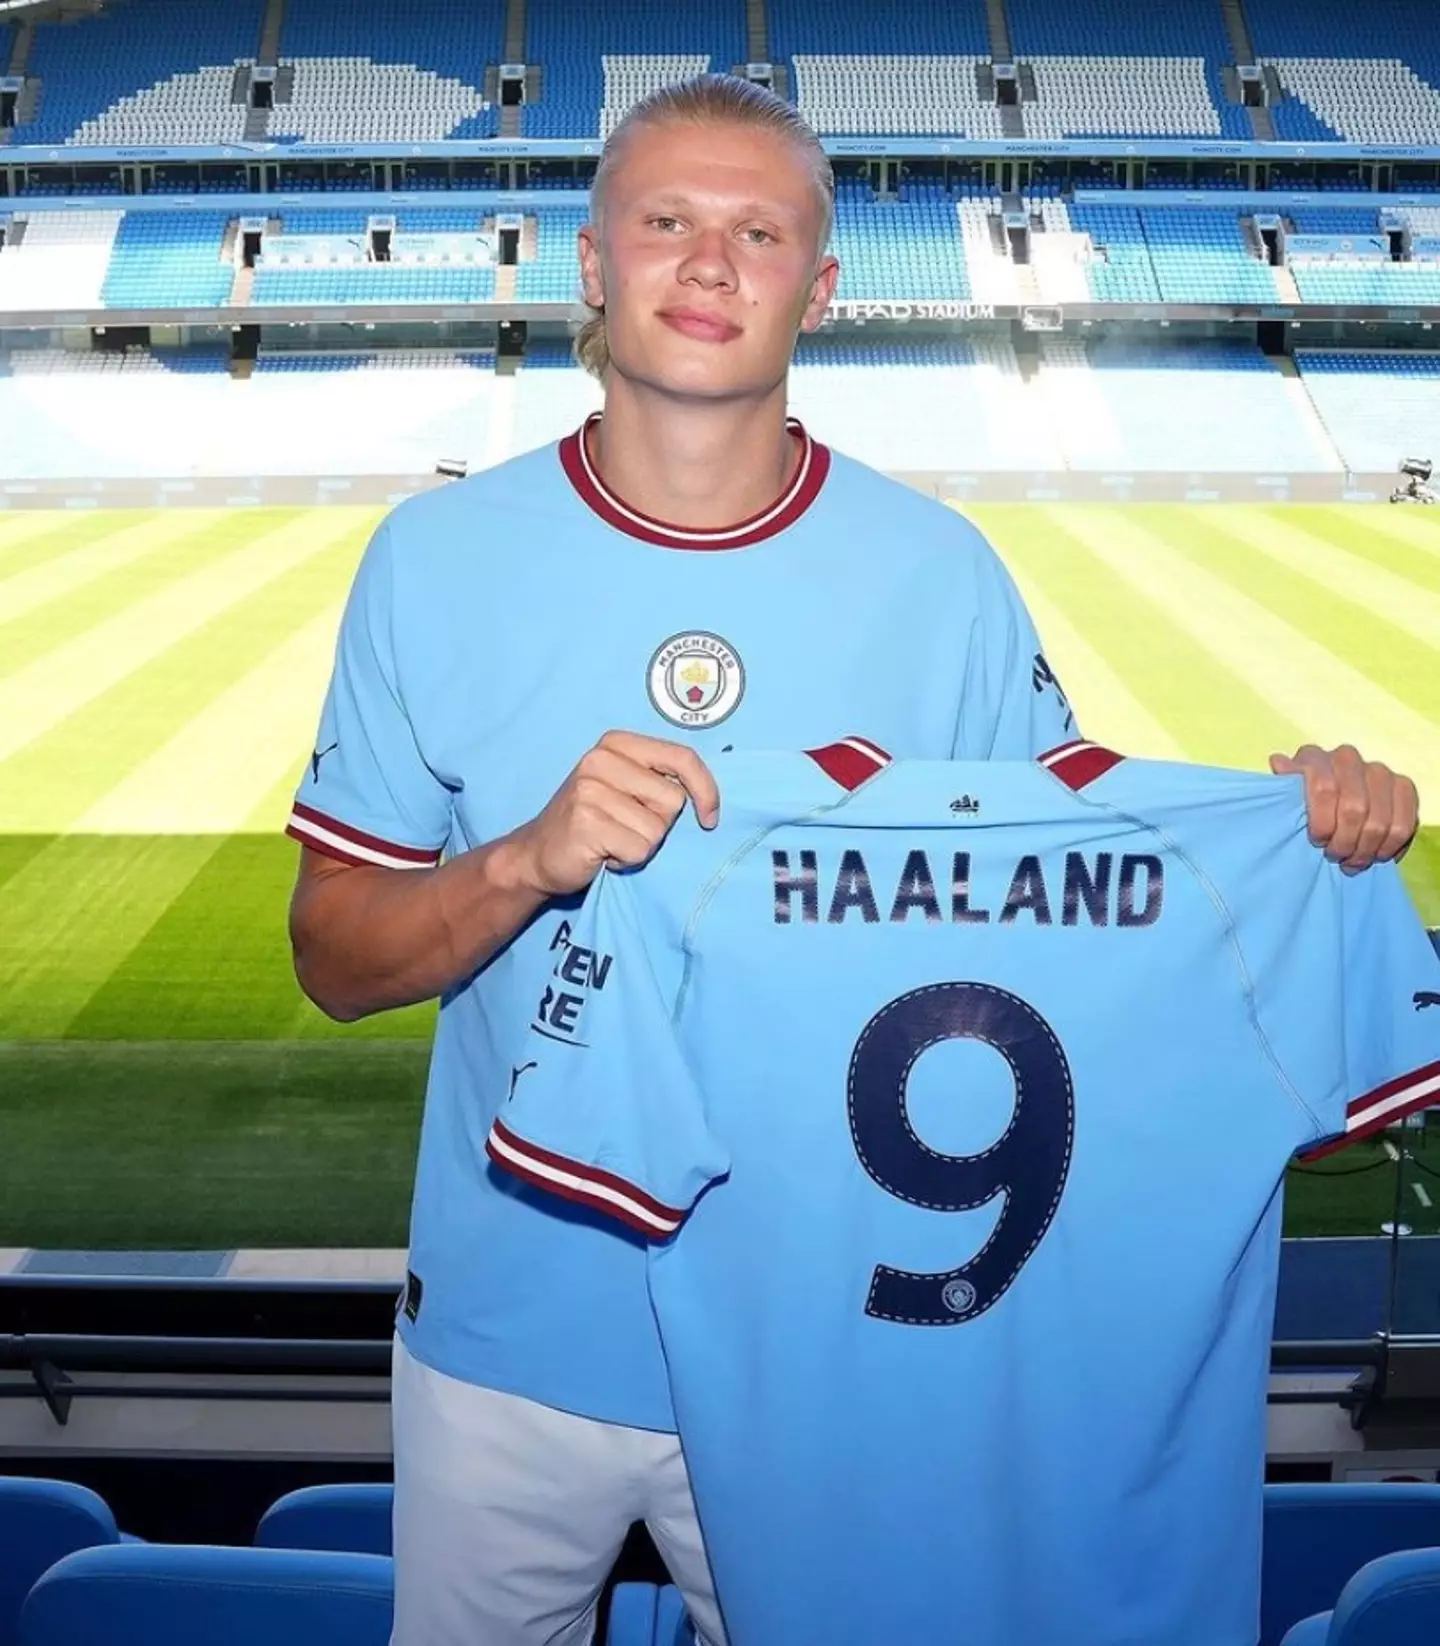 Keane believes City have the edge after signing Erling Haaland (Image: Instagram/Manchester City)